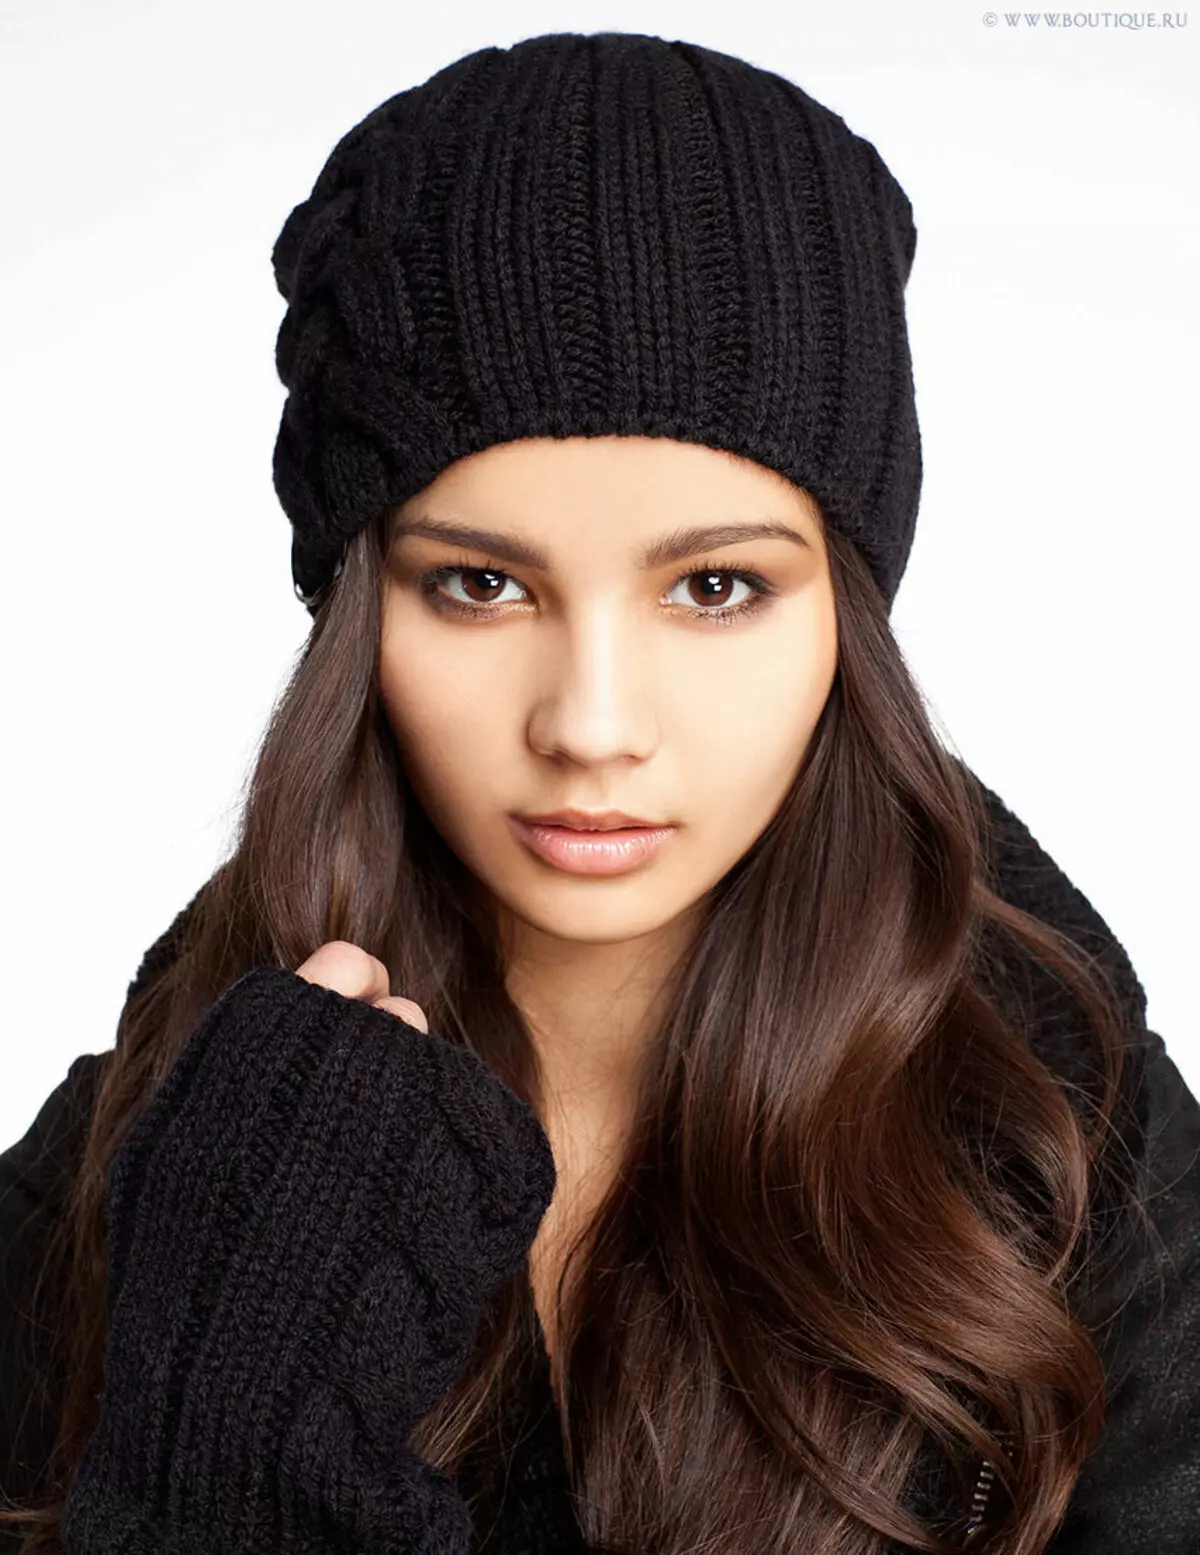 Sports caps (105 photos): Brand The North Face, Women's and Men's Knitted Models 2021, with Pompon, Fashion Hats of Ushanki 2966_56